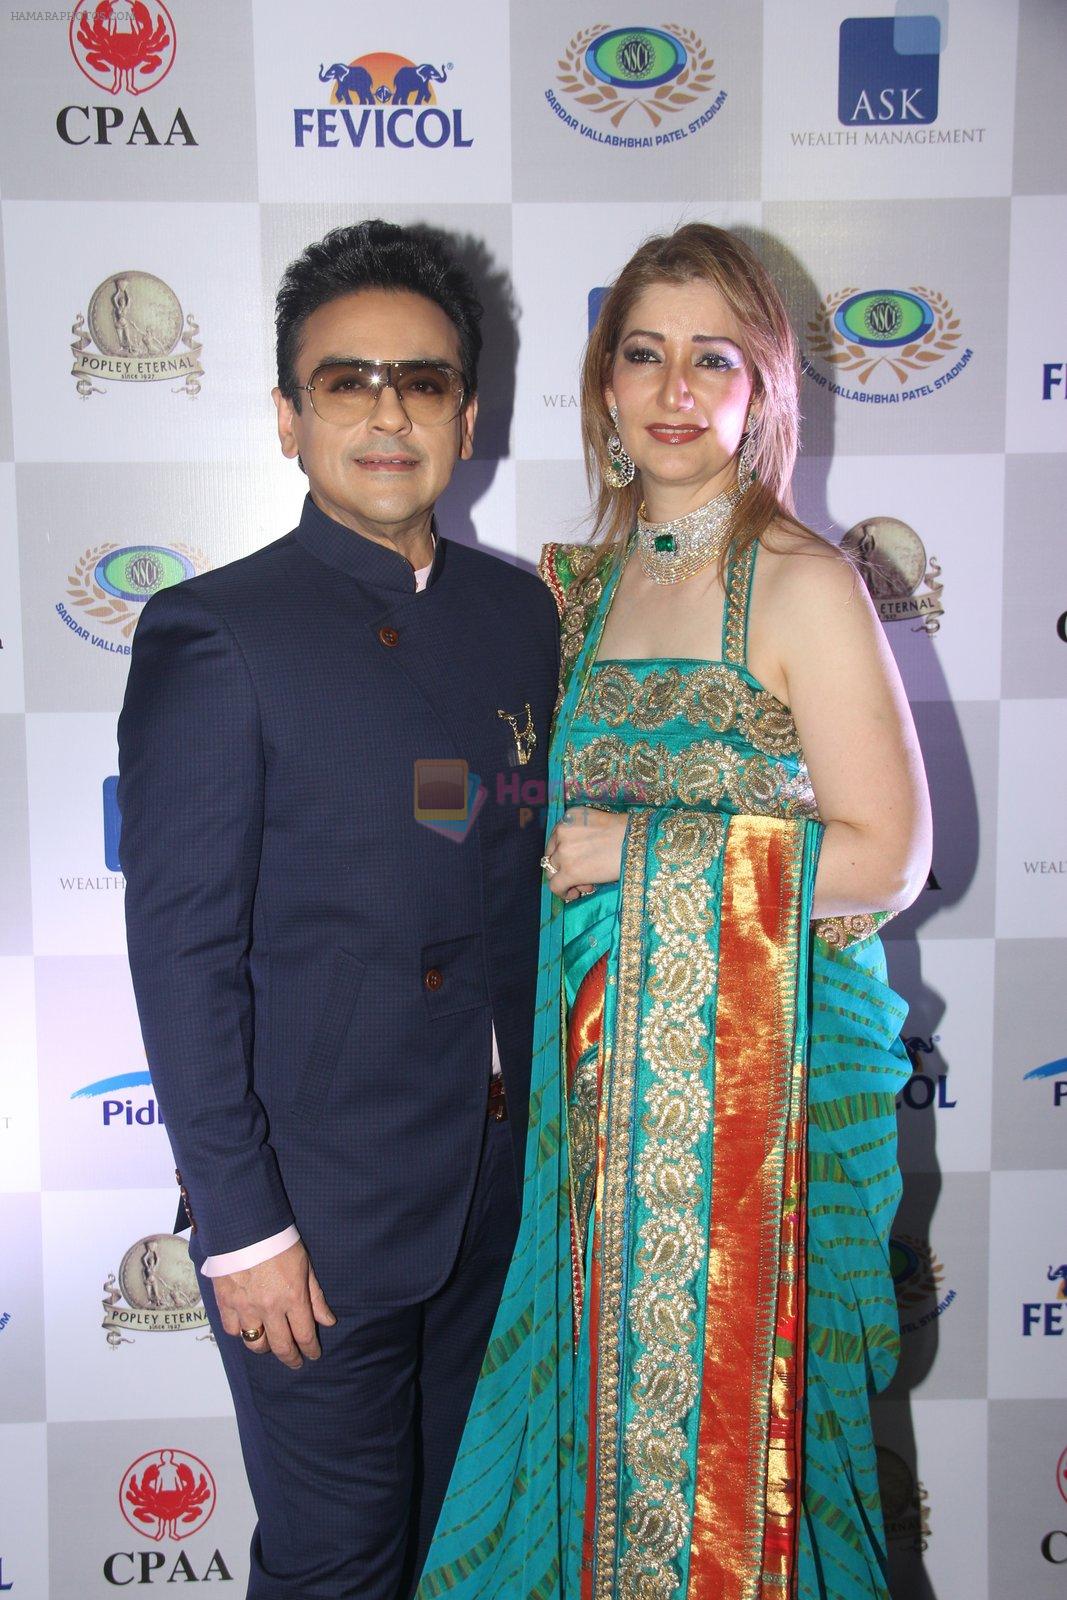 Adnan Sami at CPAA Fevicol SHOW on 20th March 2016